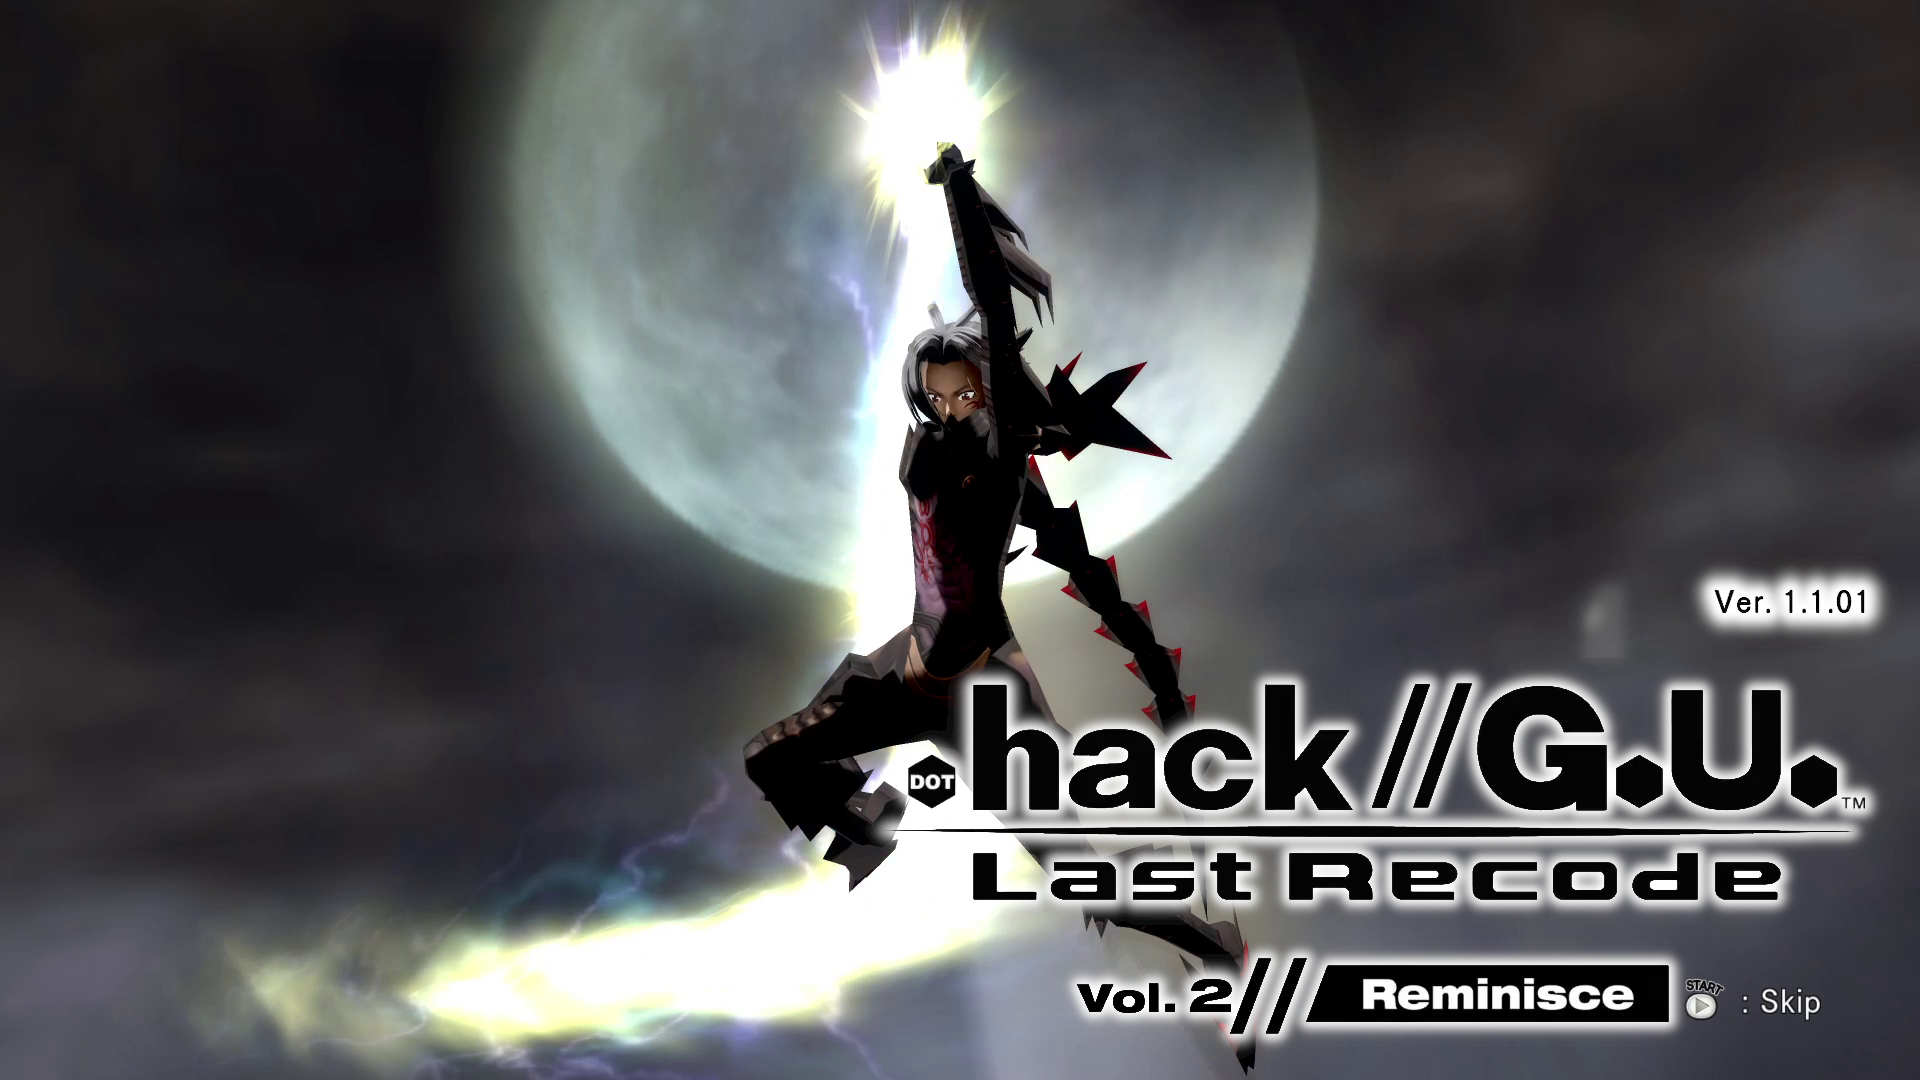 Every Dungeon is the Same – Let’s Play .hack//G.U. Last Recode Vol. 2: Reminisce Part 8 [JRPG Time]